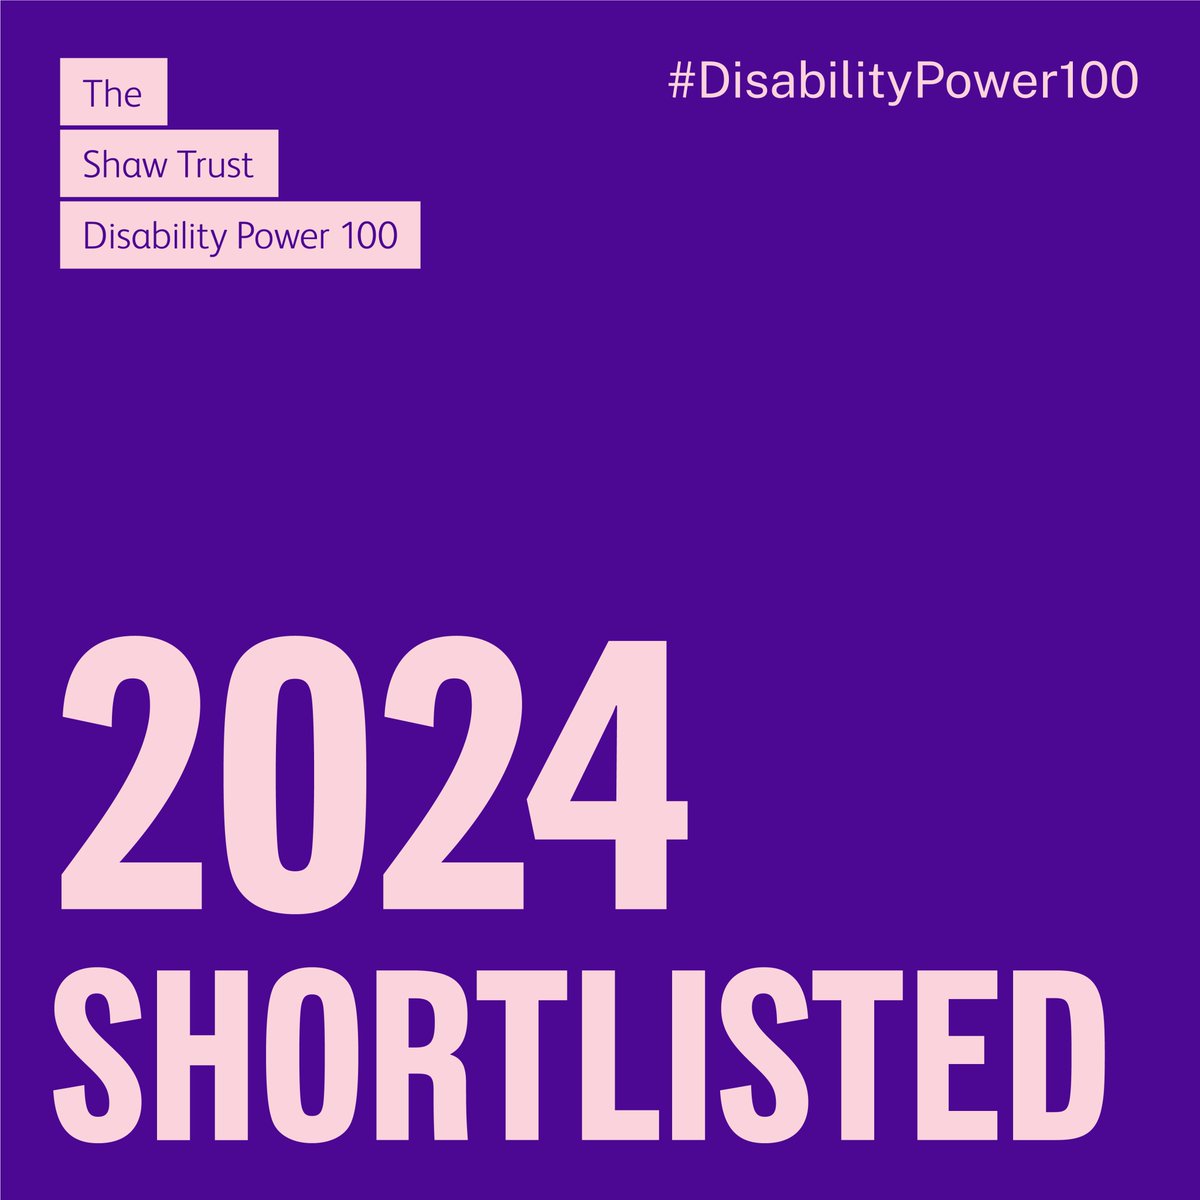 Not expecting anything.....but very proud to be even shortlisted for this amazing #DisabilityPower100 group Like to thank @lilacreviewuk and @smallbizbritain for all the encouragement they have given me recently
@ShawTrust #ChooseToInclude #InclusionRevolution #InclusionInAction